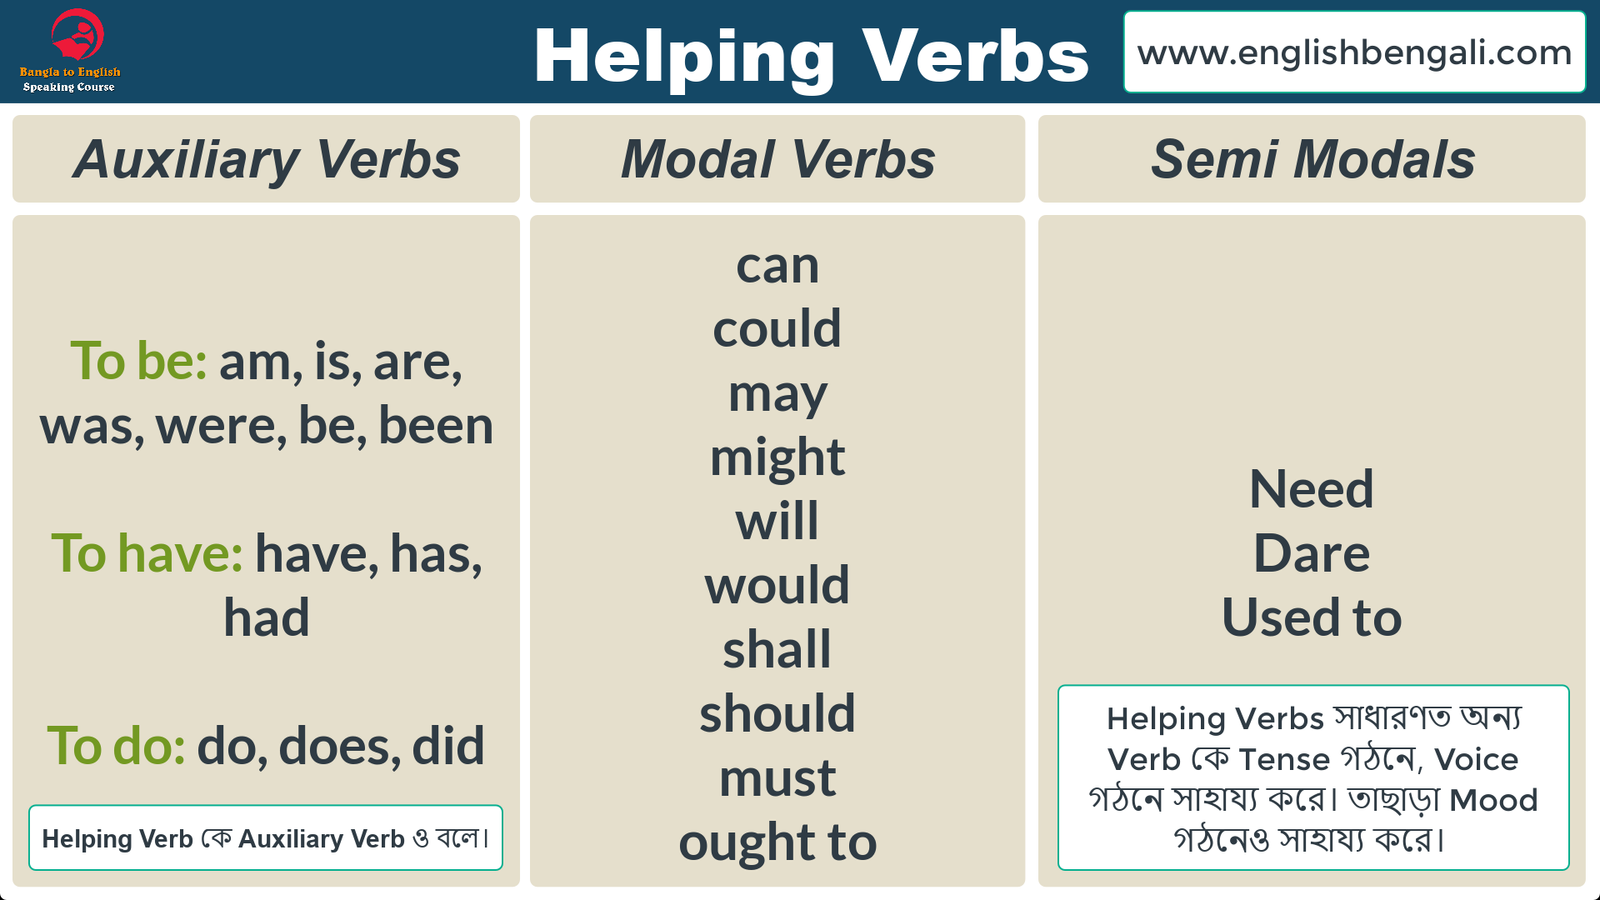 How To Use Helping Verbs